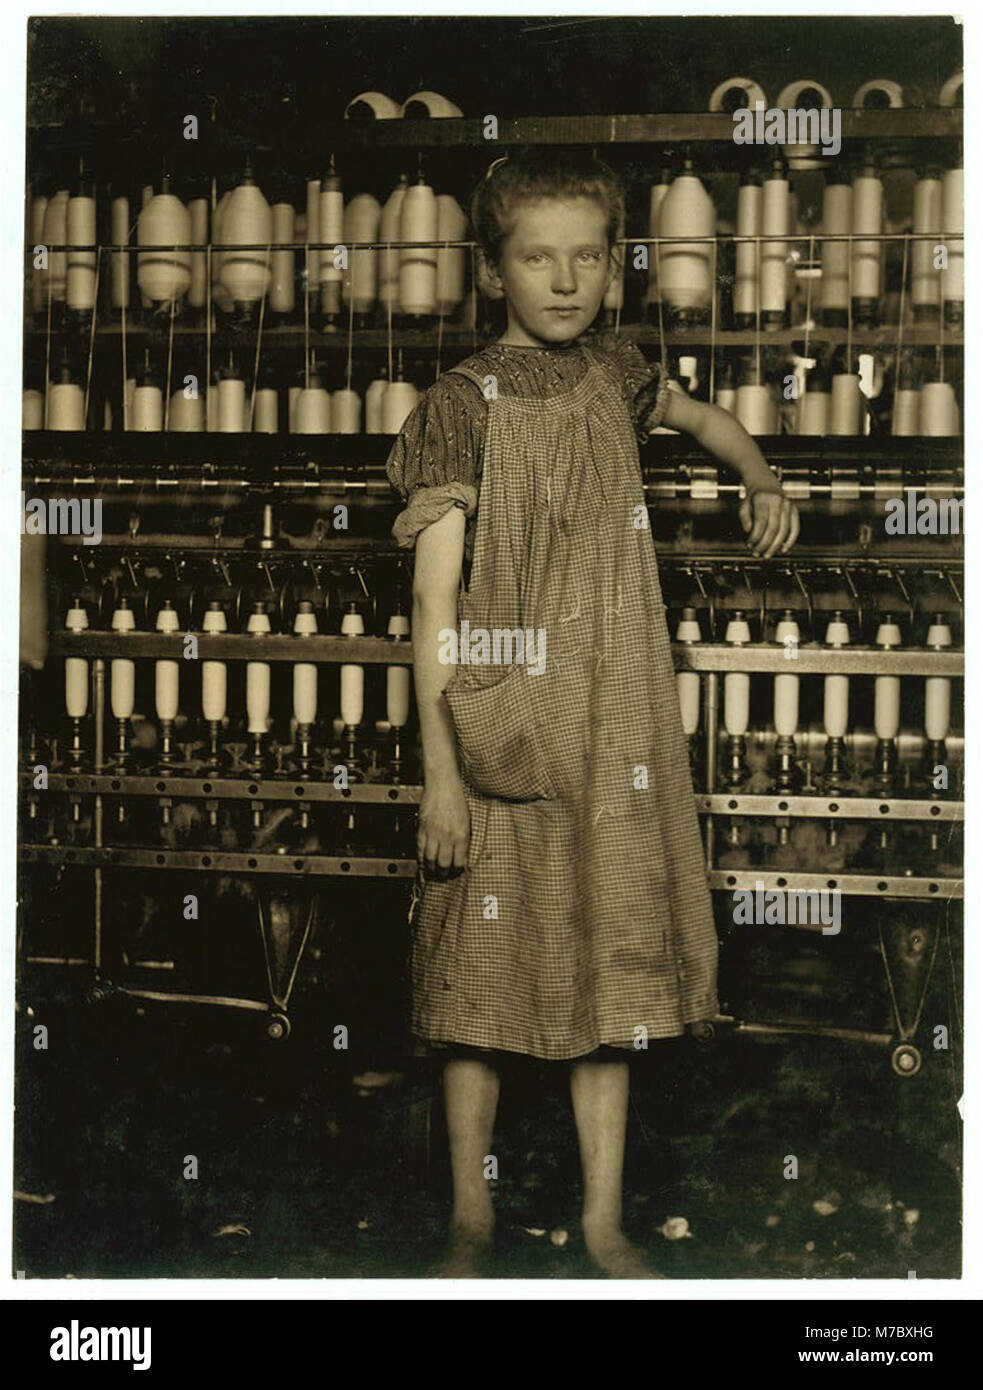 Addie Card), anaemic little spinner in North Pownal Cotton Mill. See photo No. 1056 LOC cph.3a15220 Stock Photo